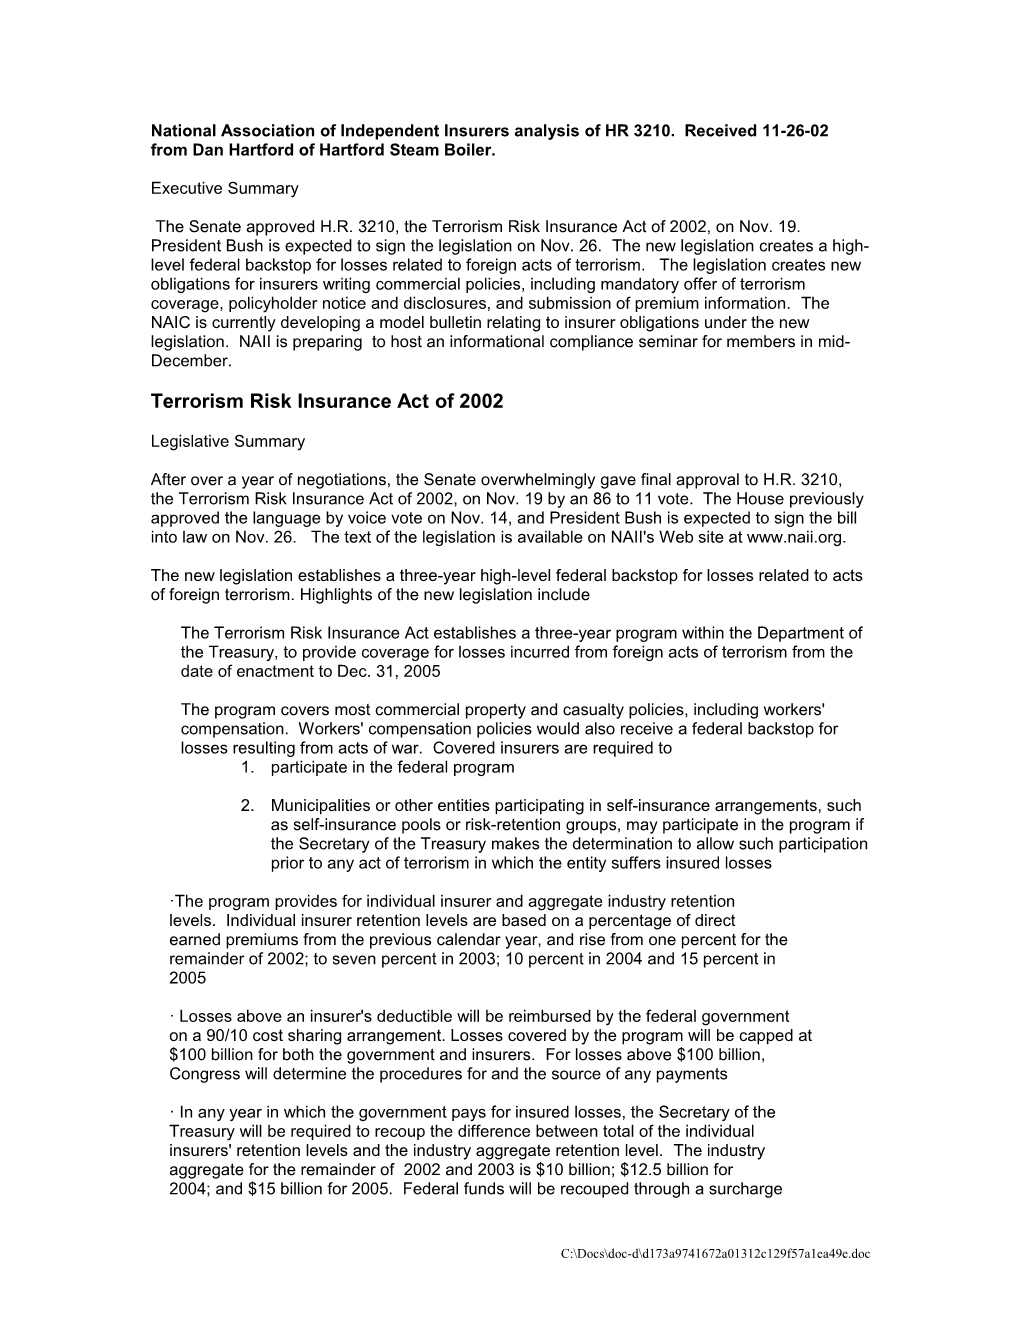 National Association of Independent Insurers Analysis of HR 3210